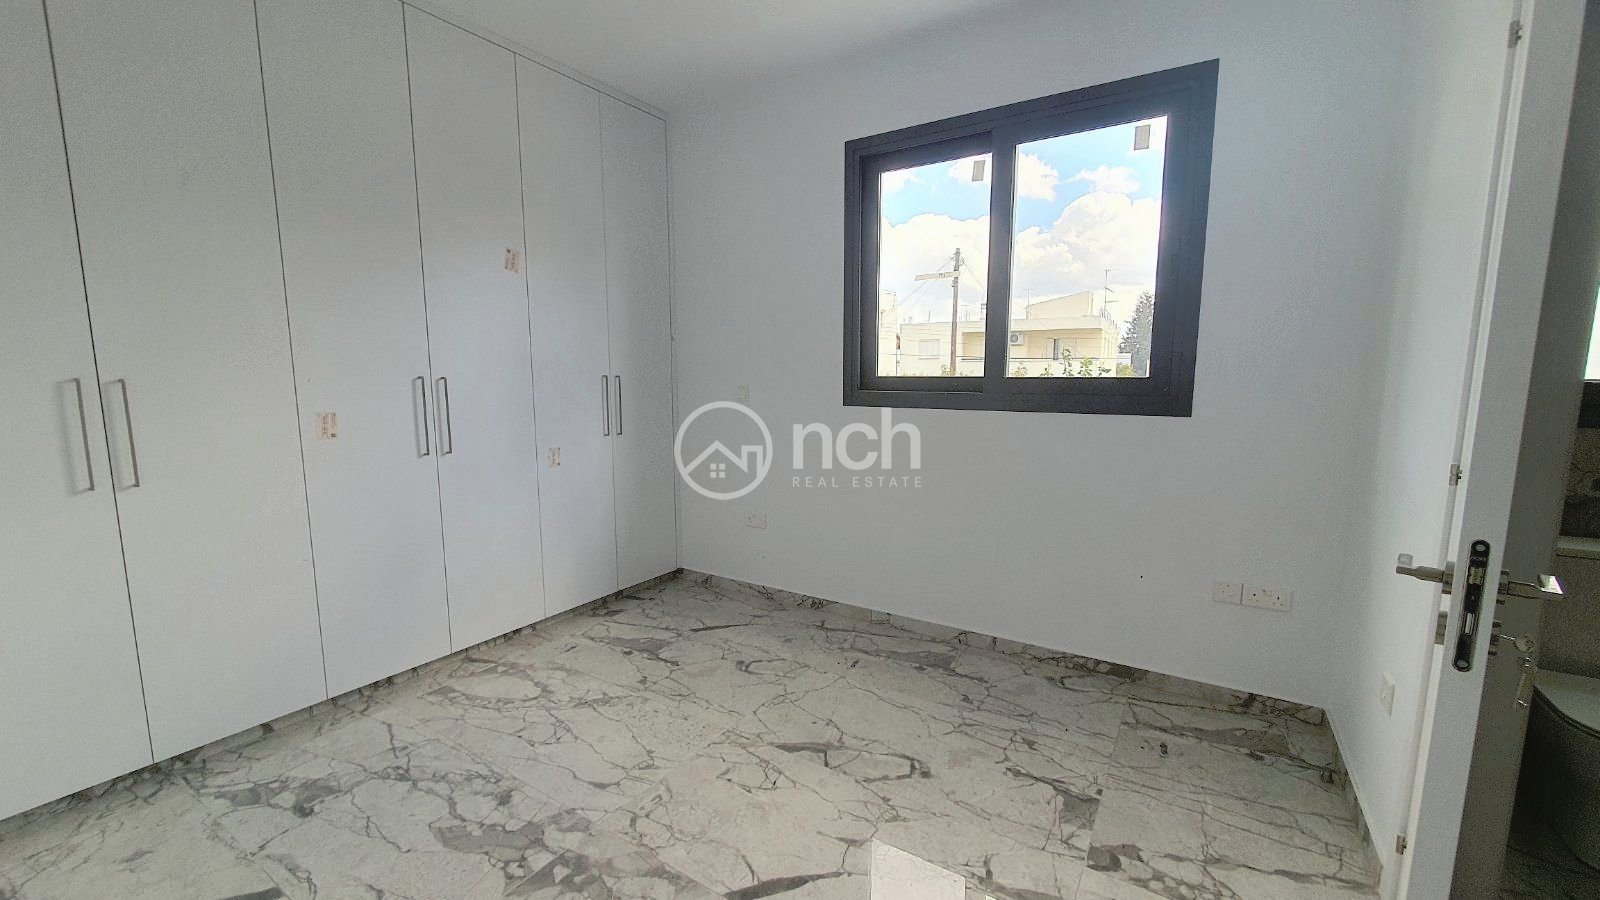 2 Bedroom Apartment for Sale in Strovolos – Stavros, Nicosia District